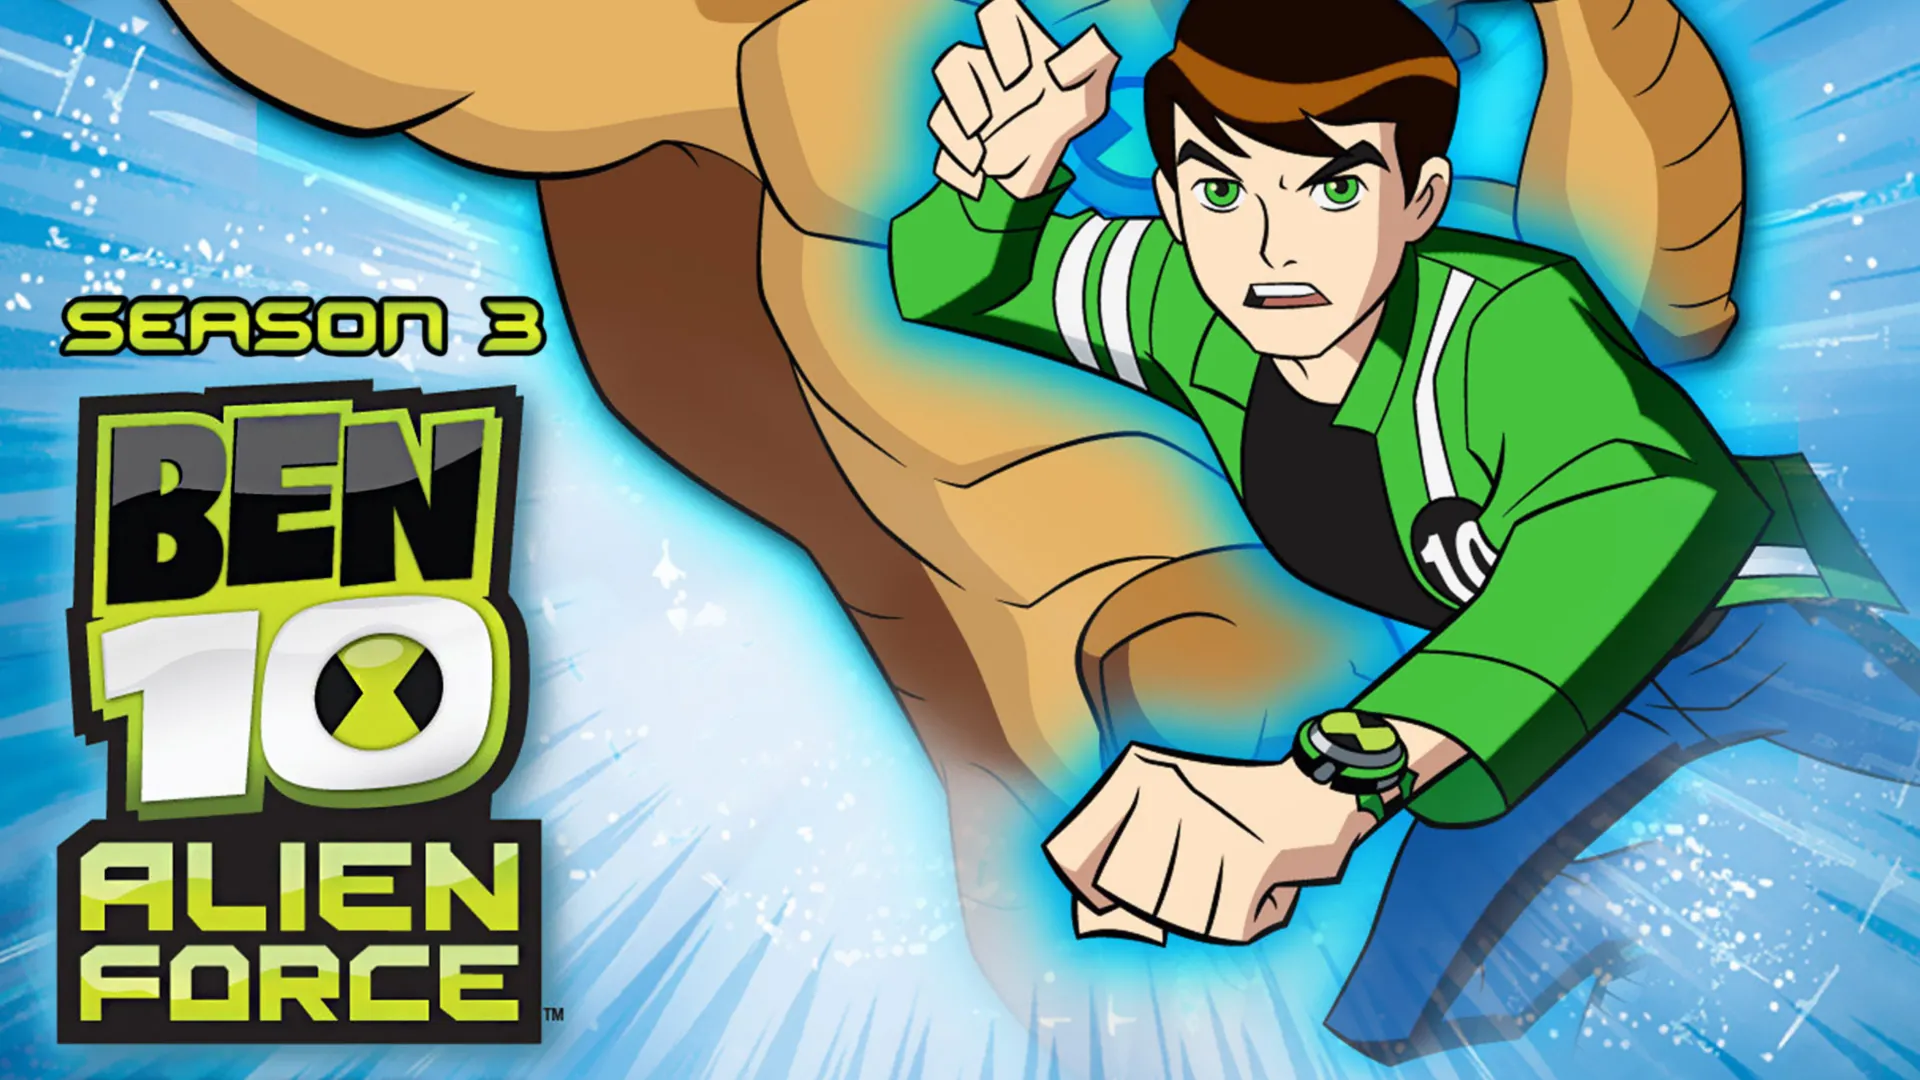 Ben 10 Alien Force Season 3 Hindi Episodes Download in FHD Rare Toons India